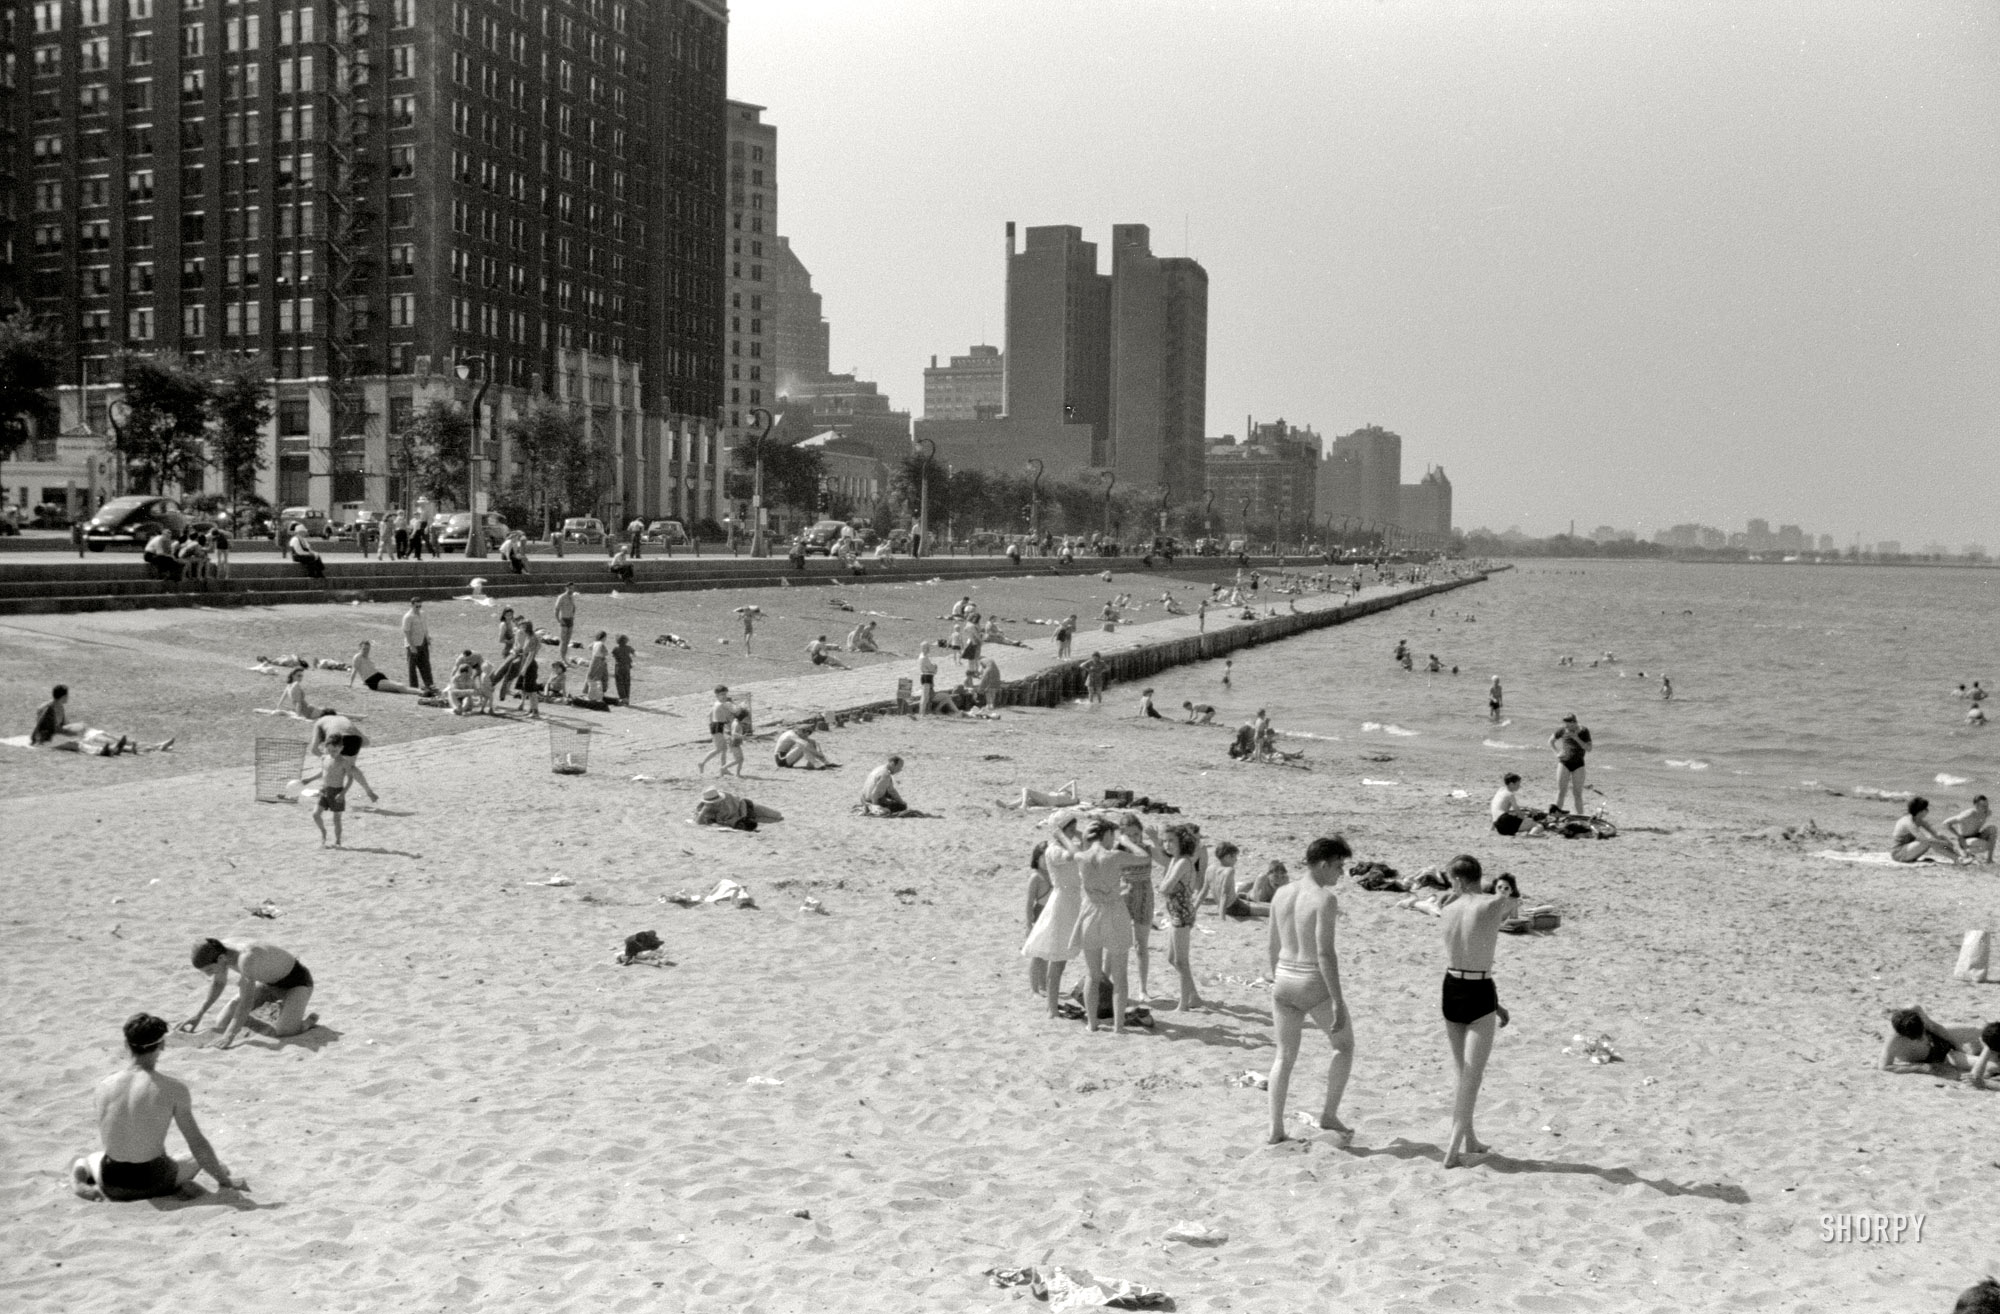 Chicago, July 1941. "Ohio Street bathing beach, Lake Michigan." 35mm nitrate negative by John Vachon for the Farm Security Administration. View full size.